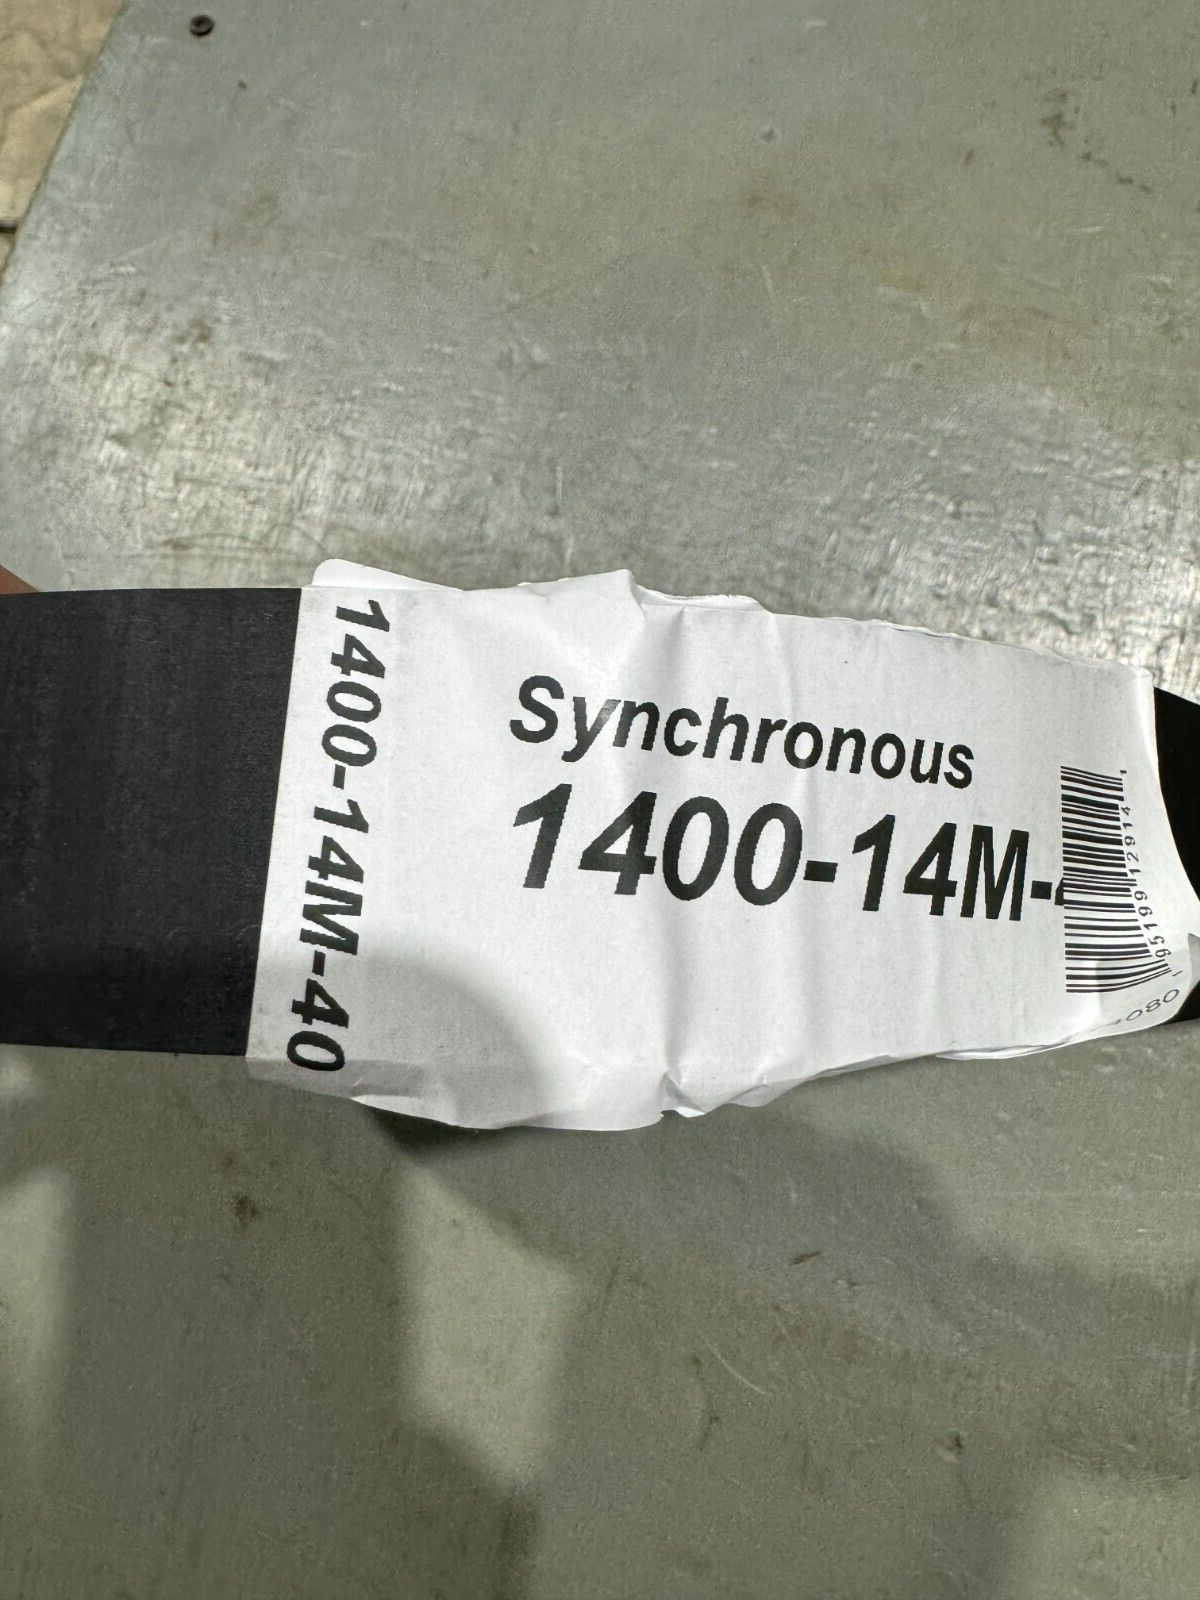 FACTORY NEW GOODYEAR SYNCHRONOUS Sync RPP TIMING BELT 1400-14M-40